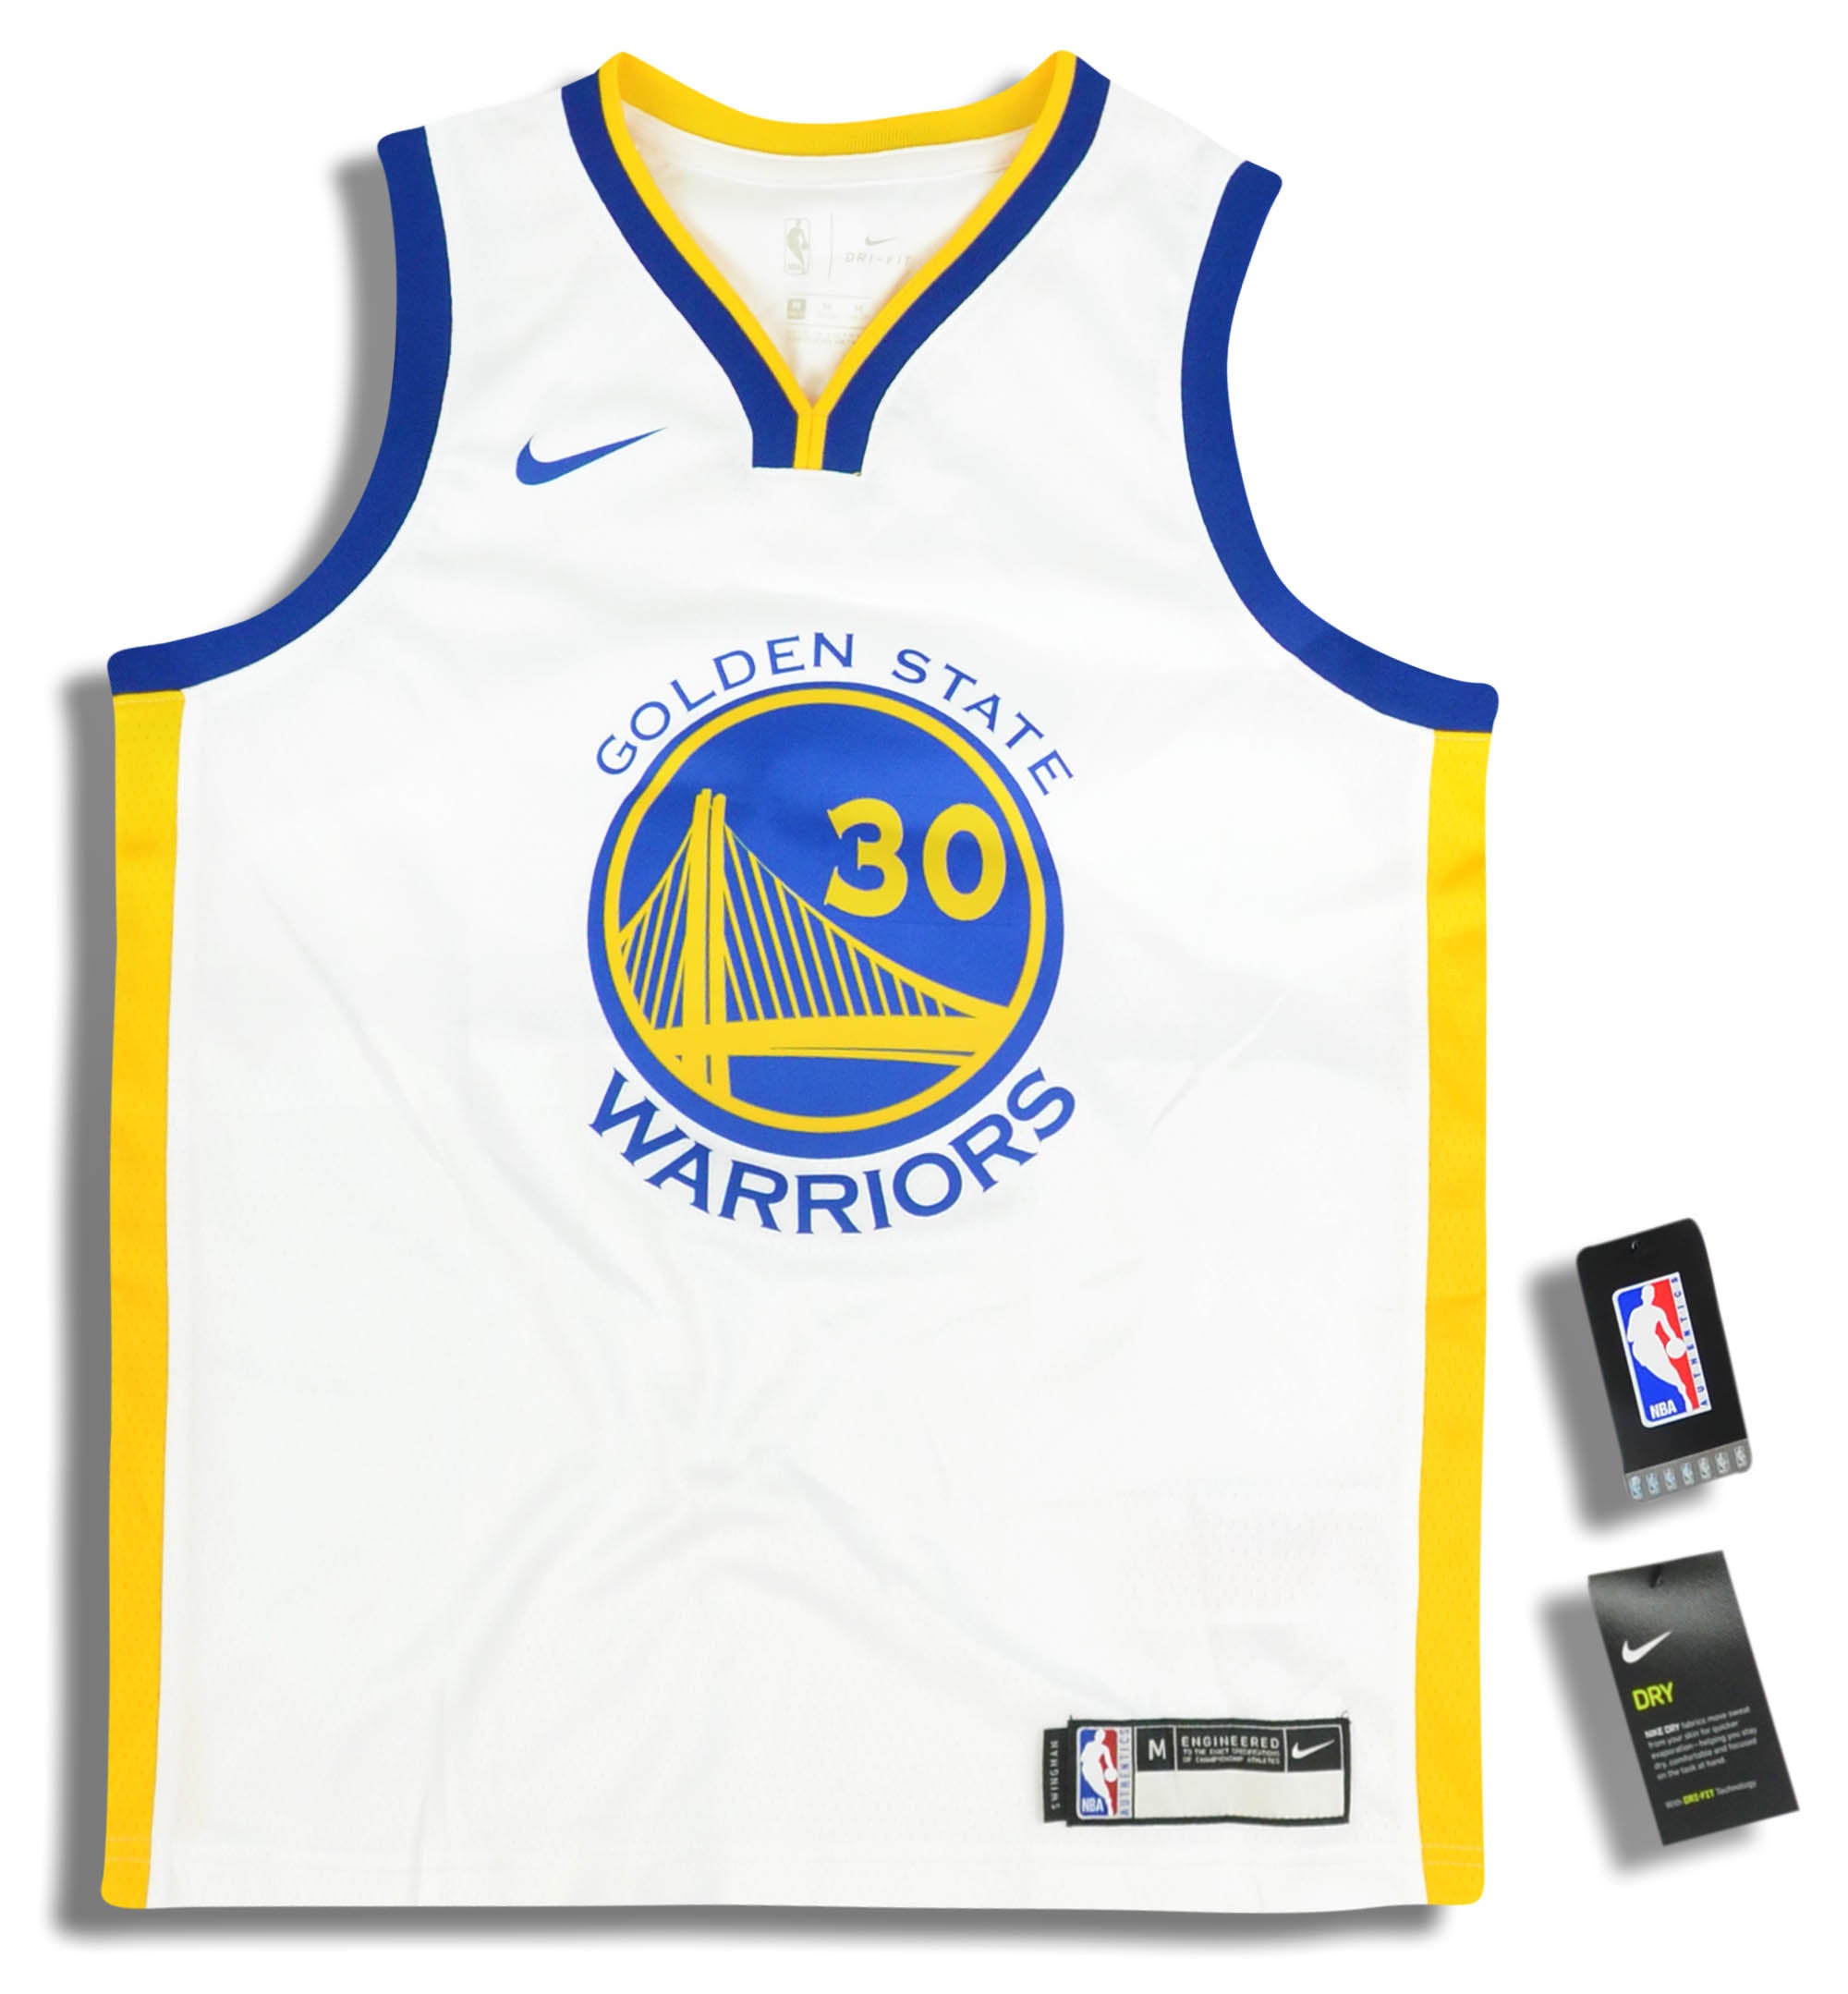 2018-19 GOLDEN STATE WARRIORS CURRY #30 NIKE SWINGMAN JERSEY (HOME) Y - W/TAGS